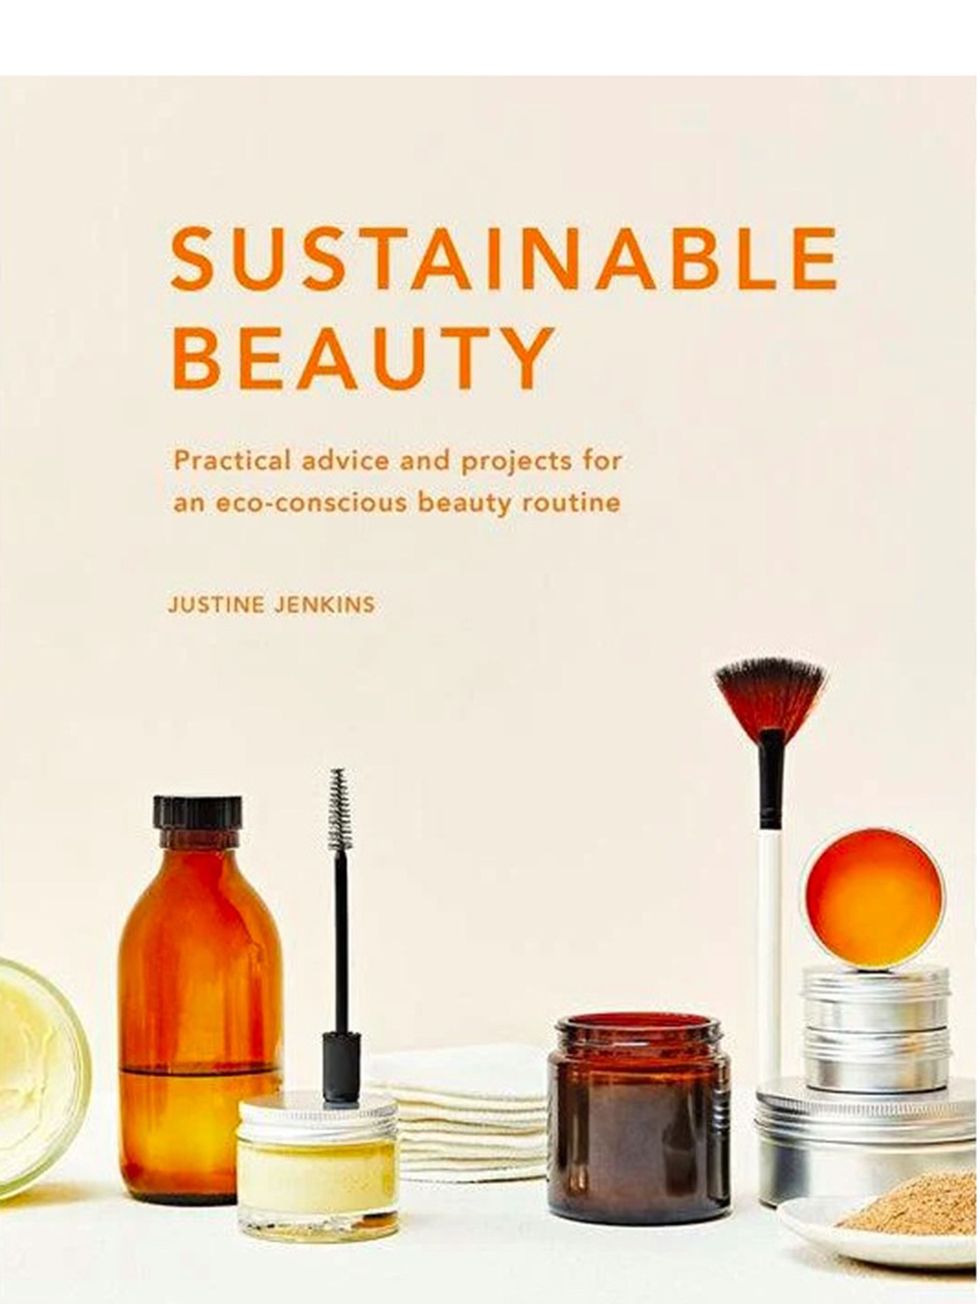 Sustainable Beauty: Practical Advice and Projects for an Eco-Conscious Beauty Routine